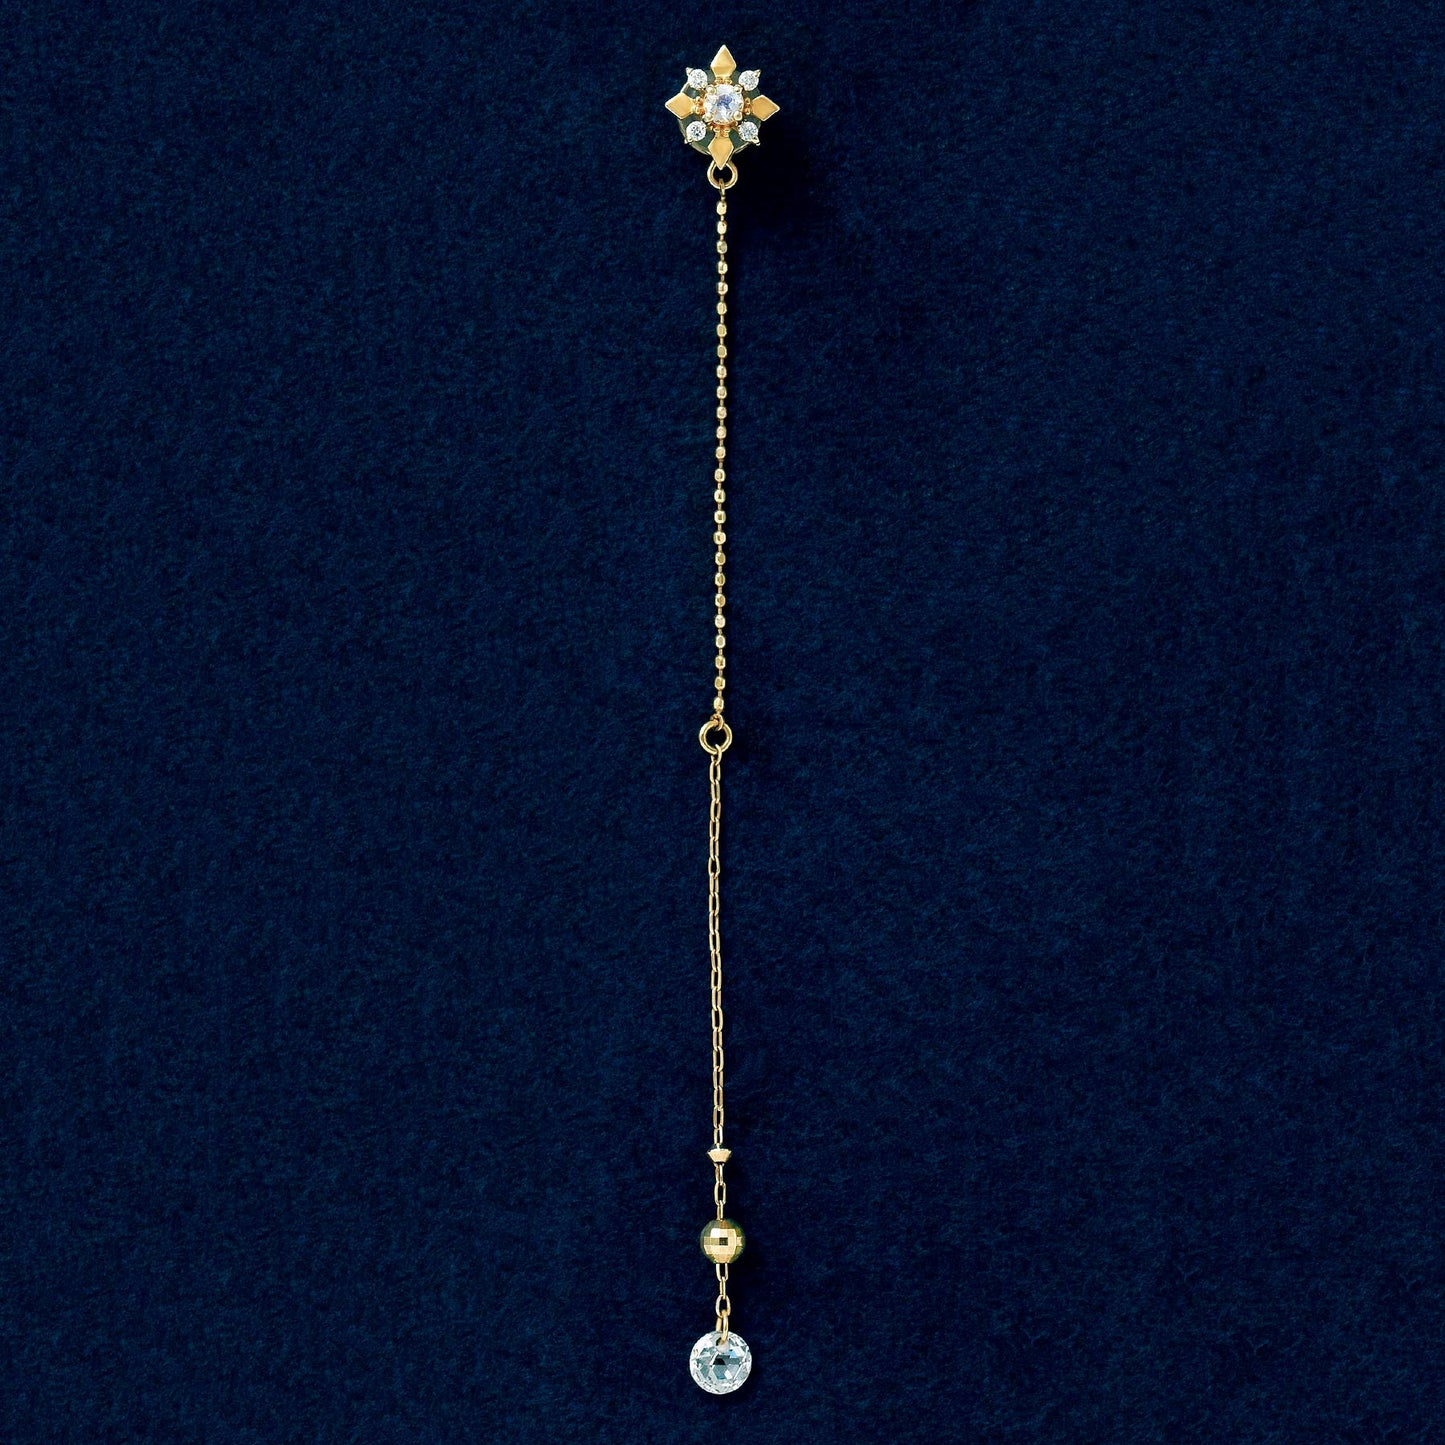 [Solo Earring] 18K/10K "The First Star" 3Way Chain Stud Single Earring (Yellow Gold) - Product Image